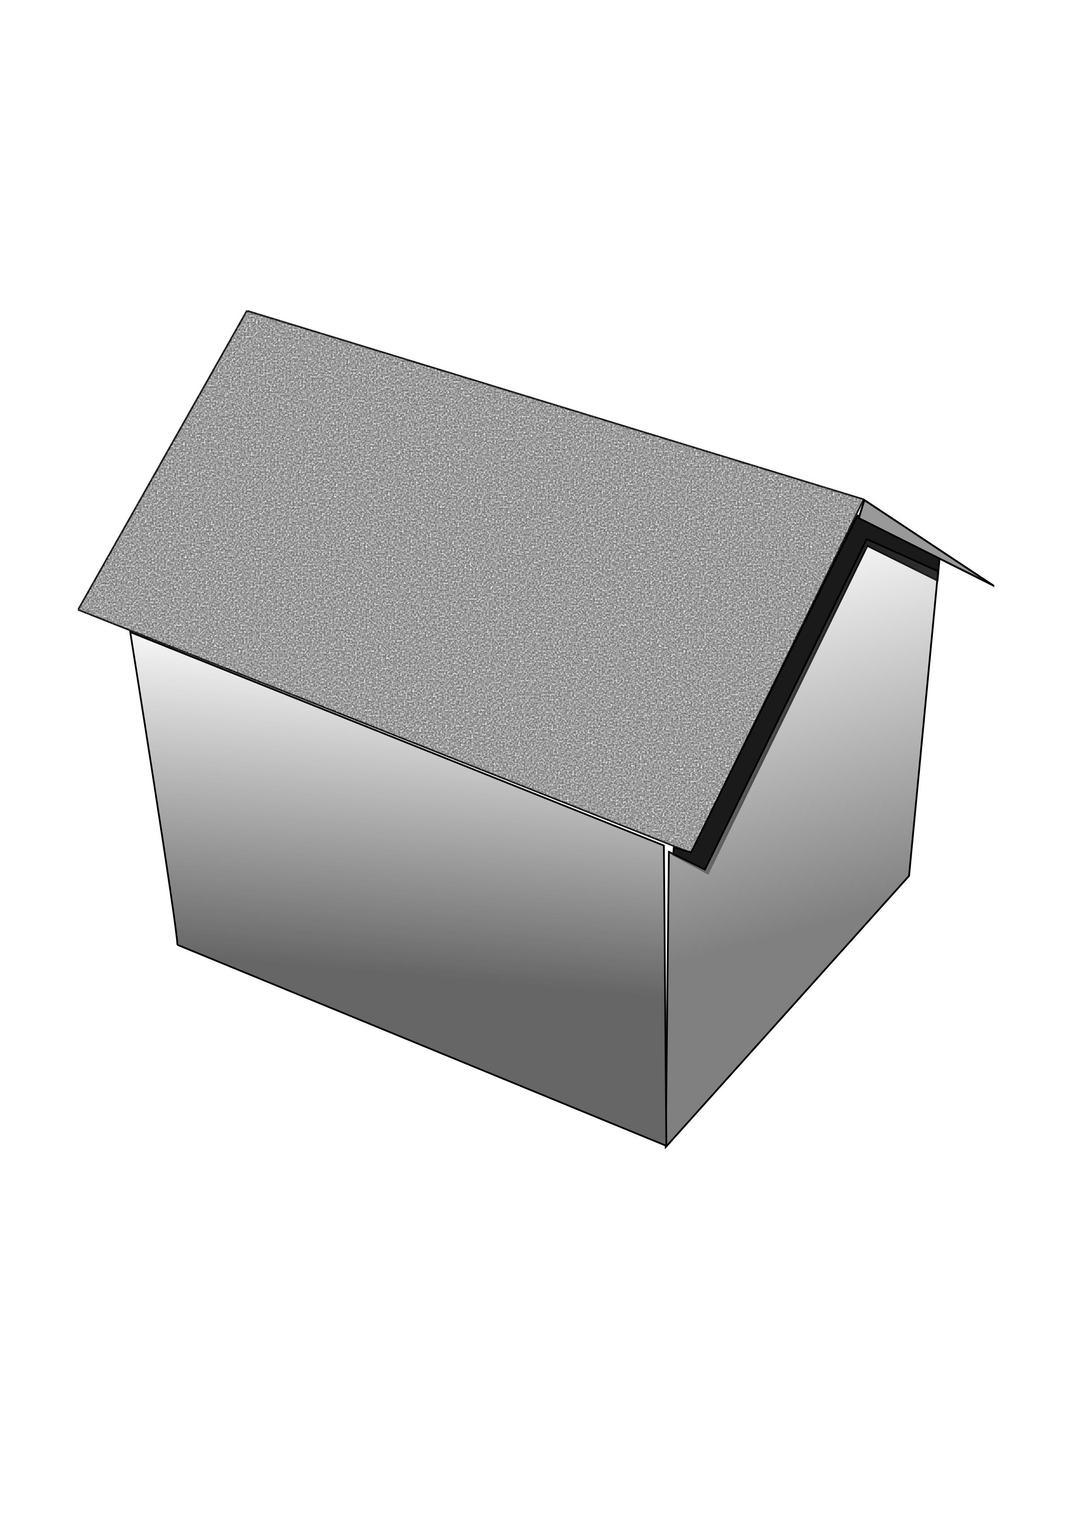 gable-roof png transparent